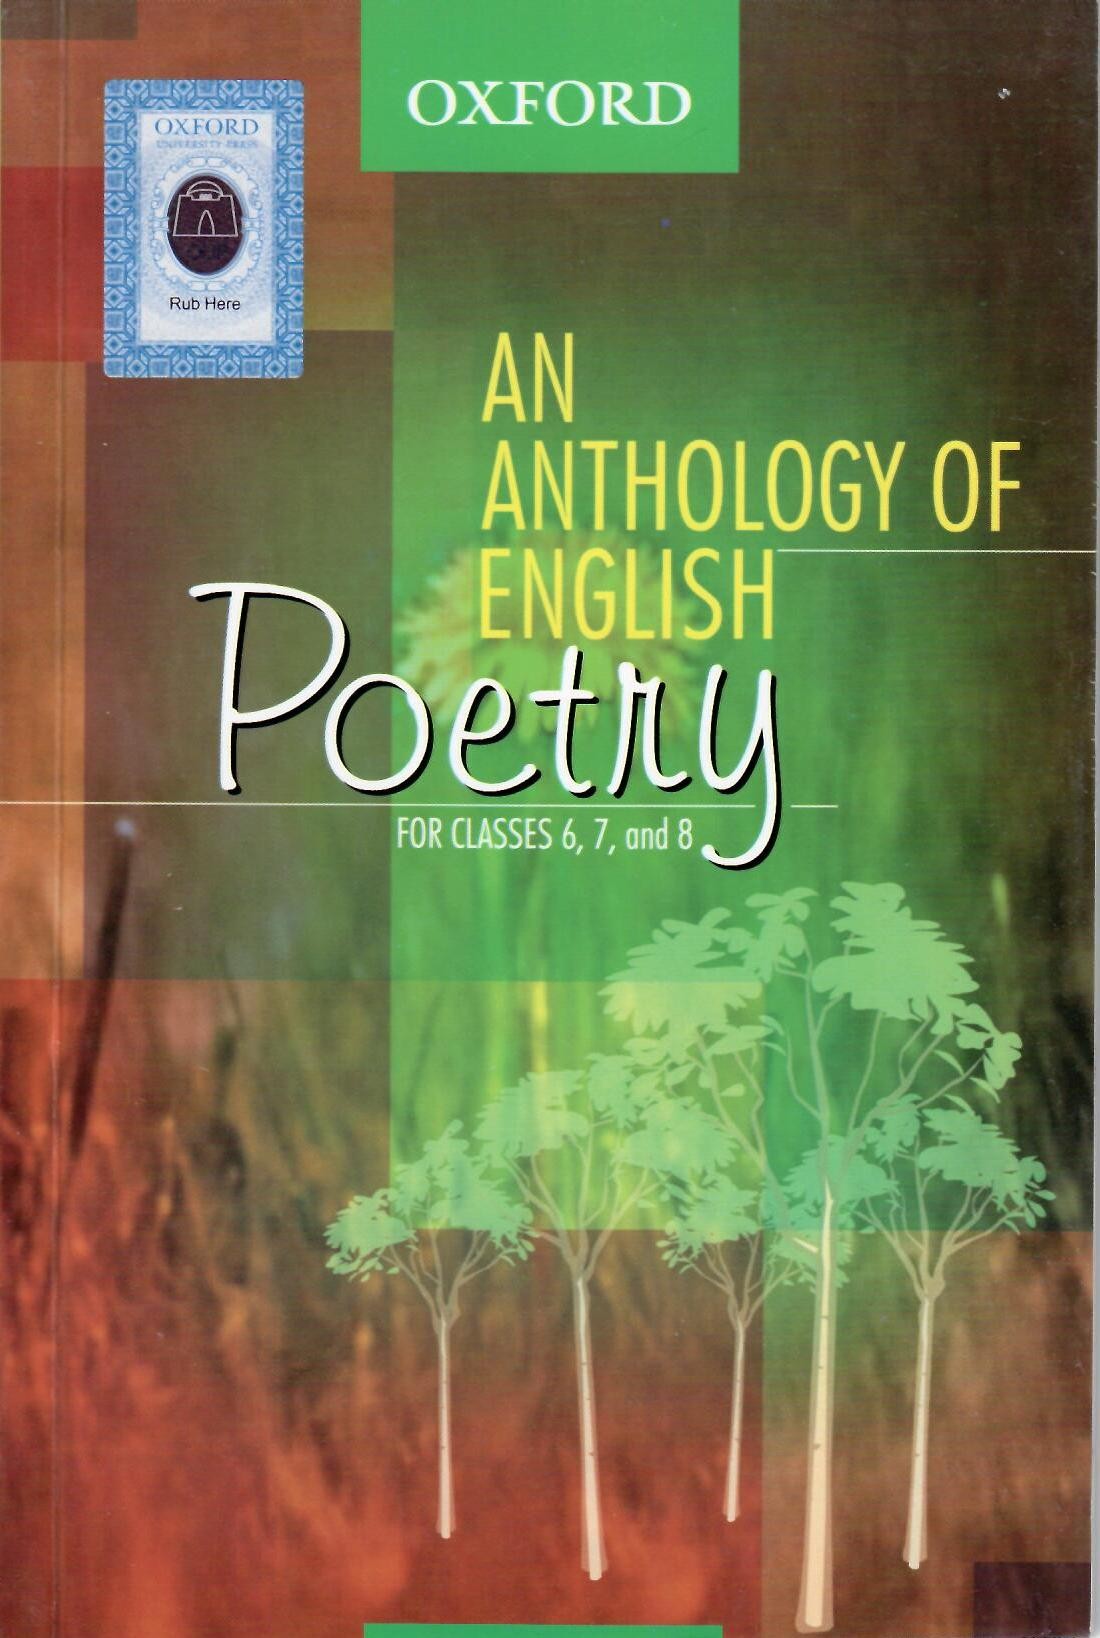 ENGLISH  An Anthology of English Poetry Classes 6, 7, 8 (one book for all classes) Oxford